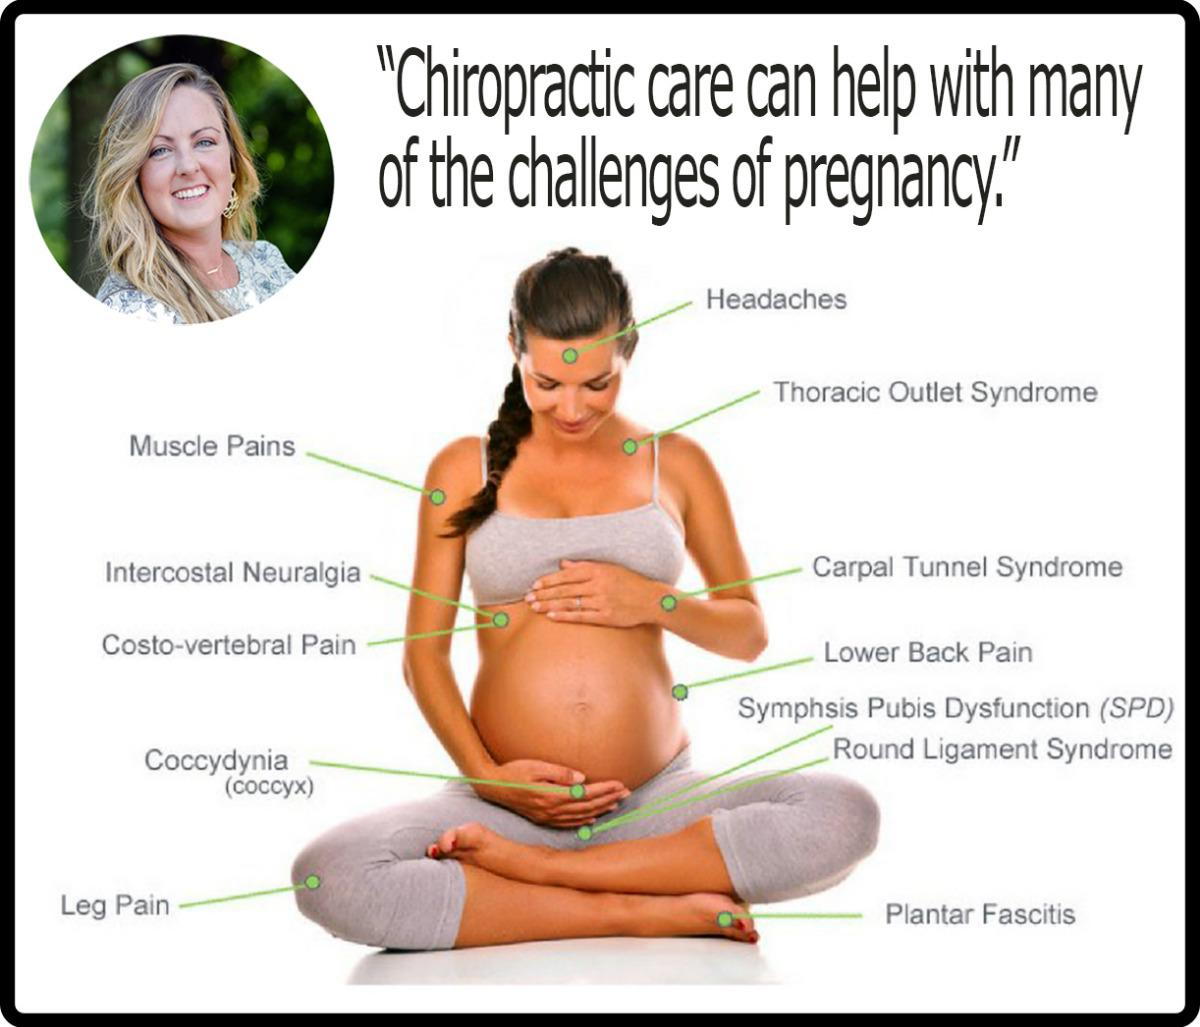 Top local OB/Gyn's refer to Swank Chiropractic for pregnancy care!